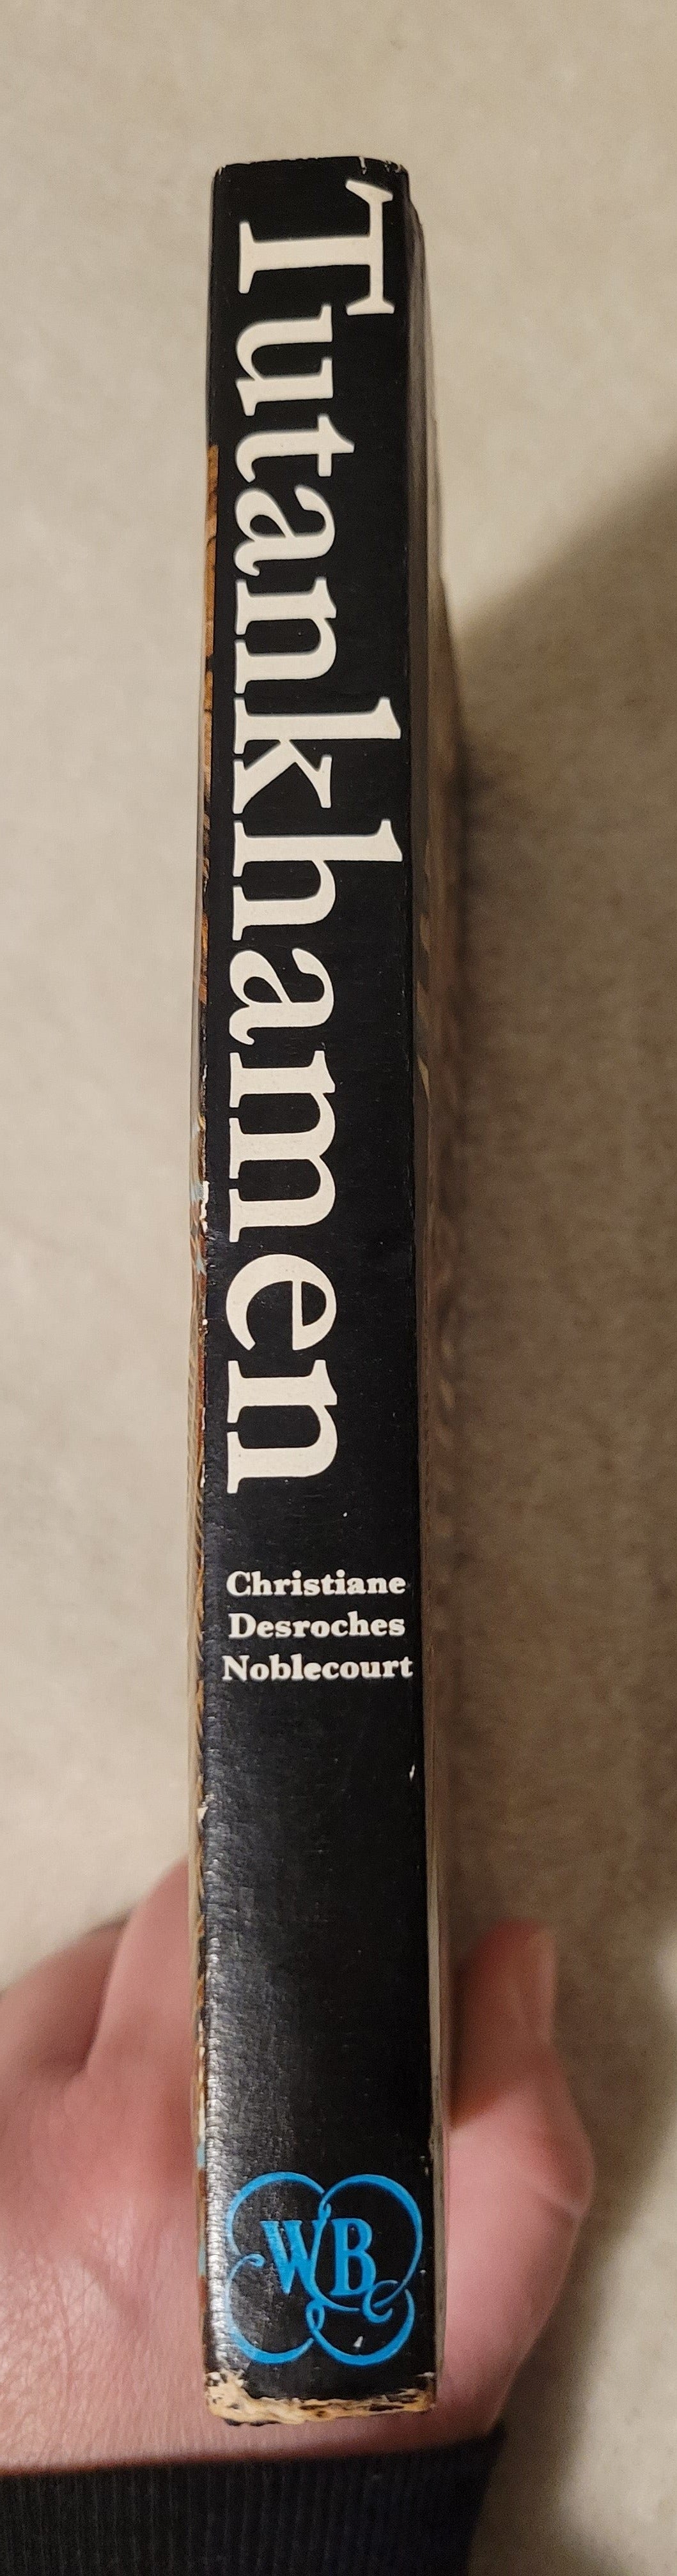 Used book for sale "Tutankhamen: Life and Death of a Pharaoh" by Christiane Deroches-Noblecourt, 1967 World Books edition. Spine